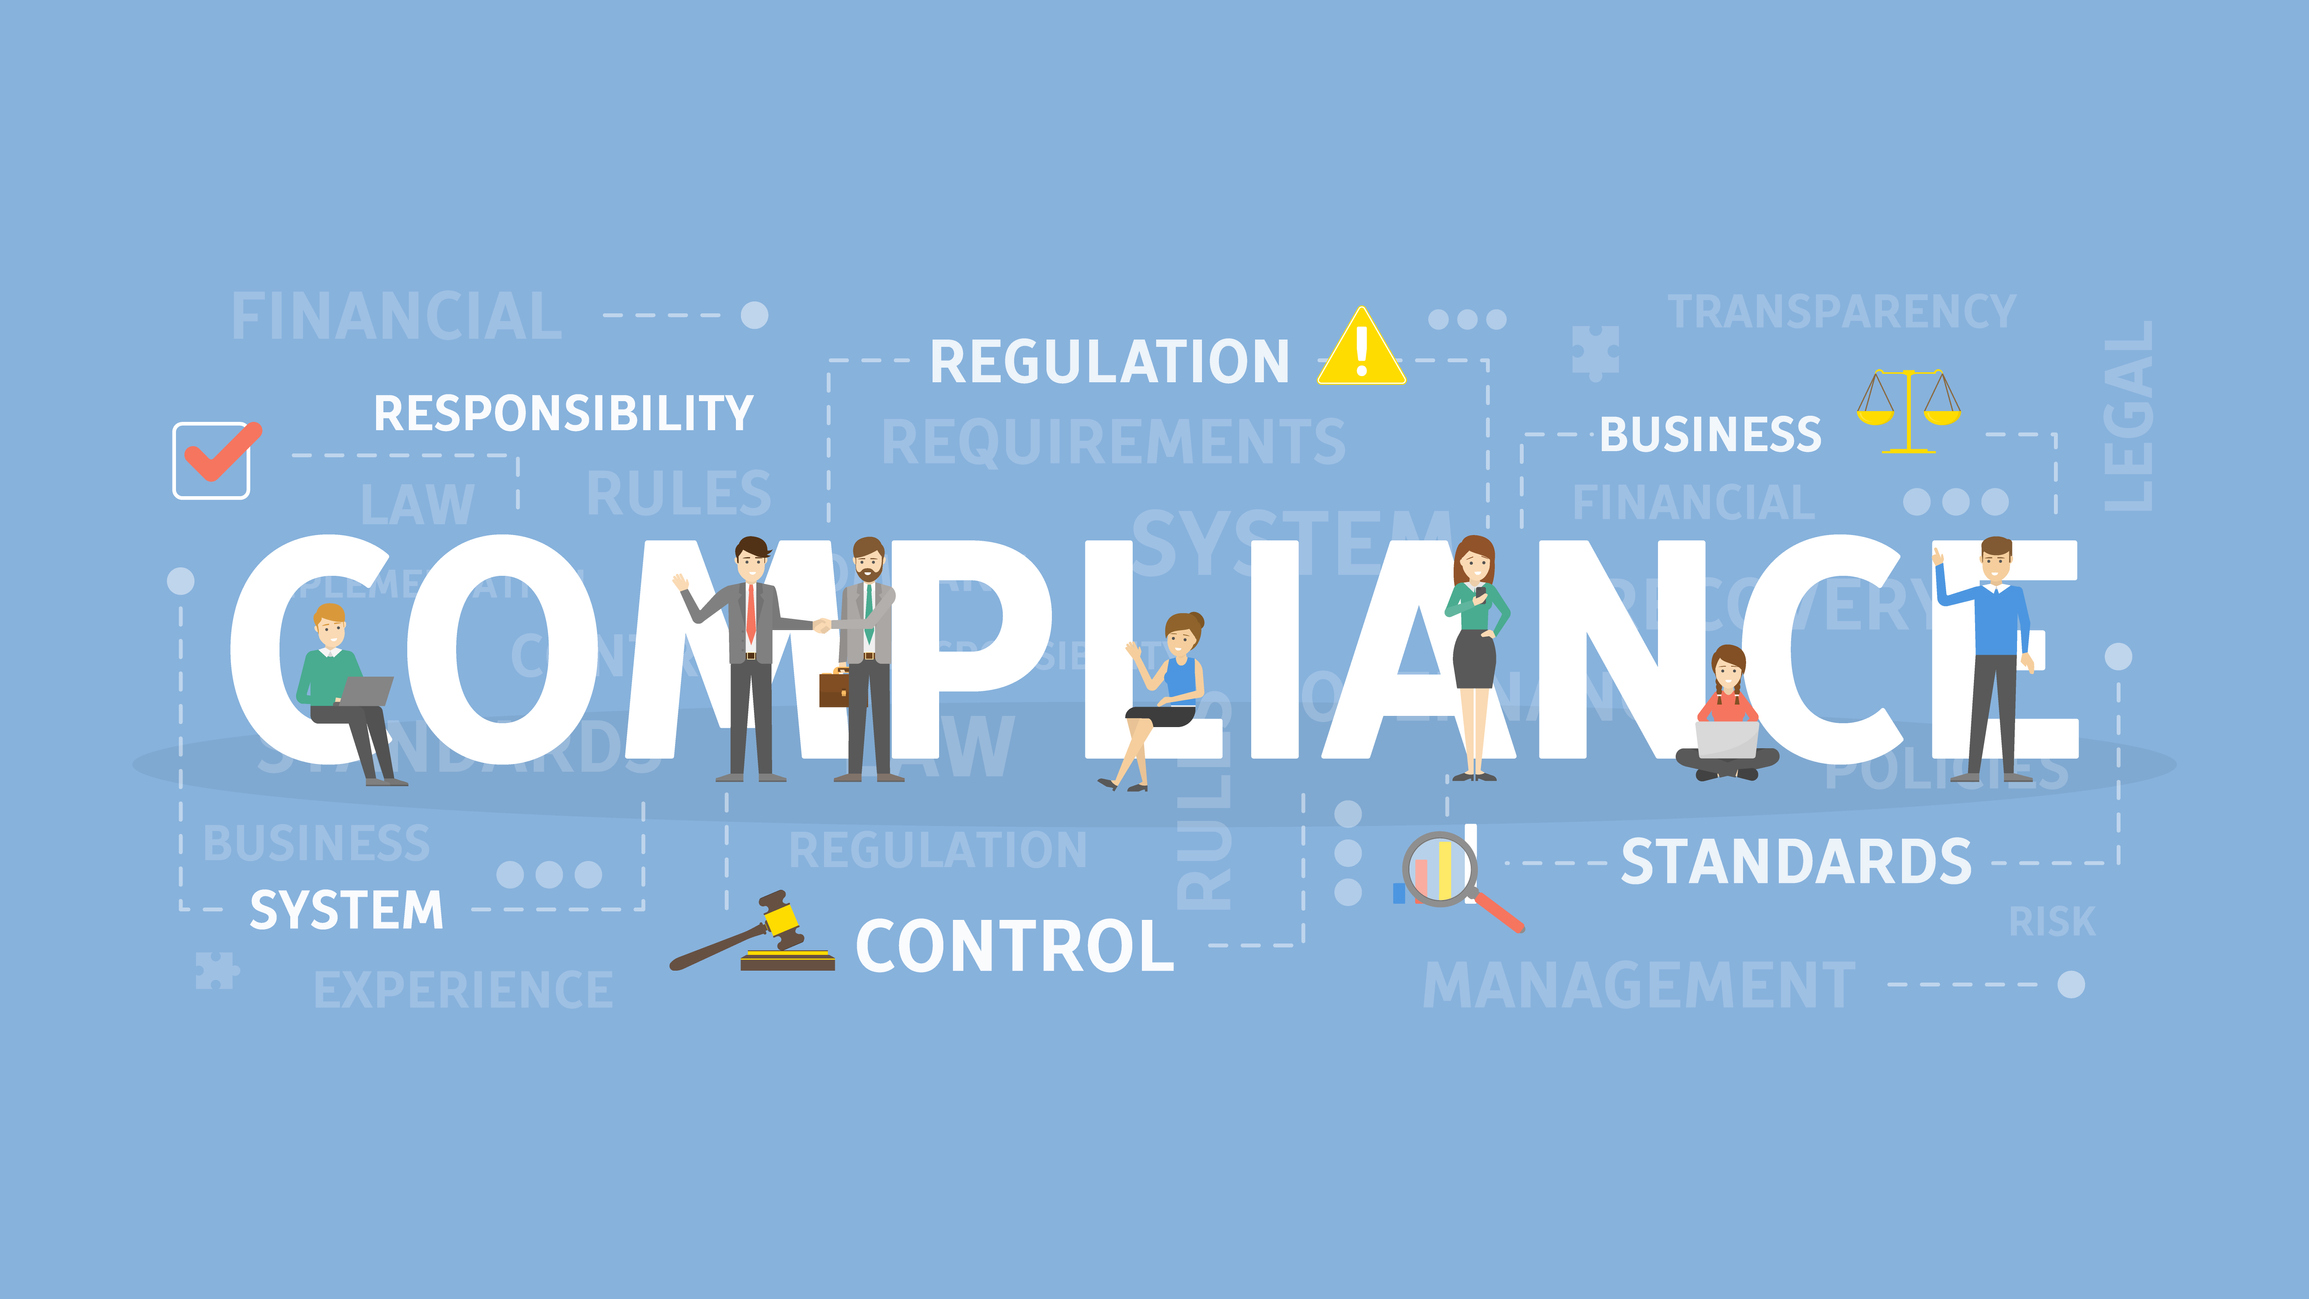 Physical or Virtual On-Site Inspections: How to Stay Compliant With FCRA Guidelines